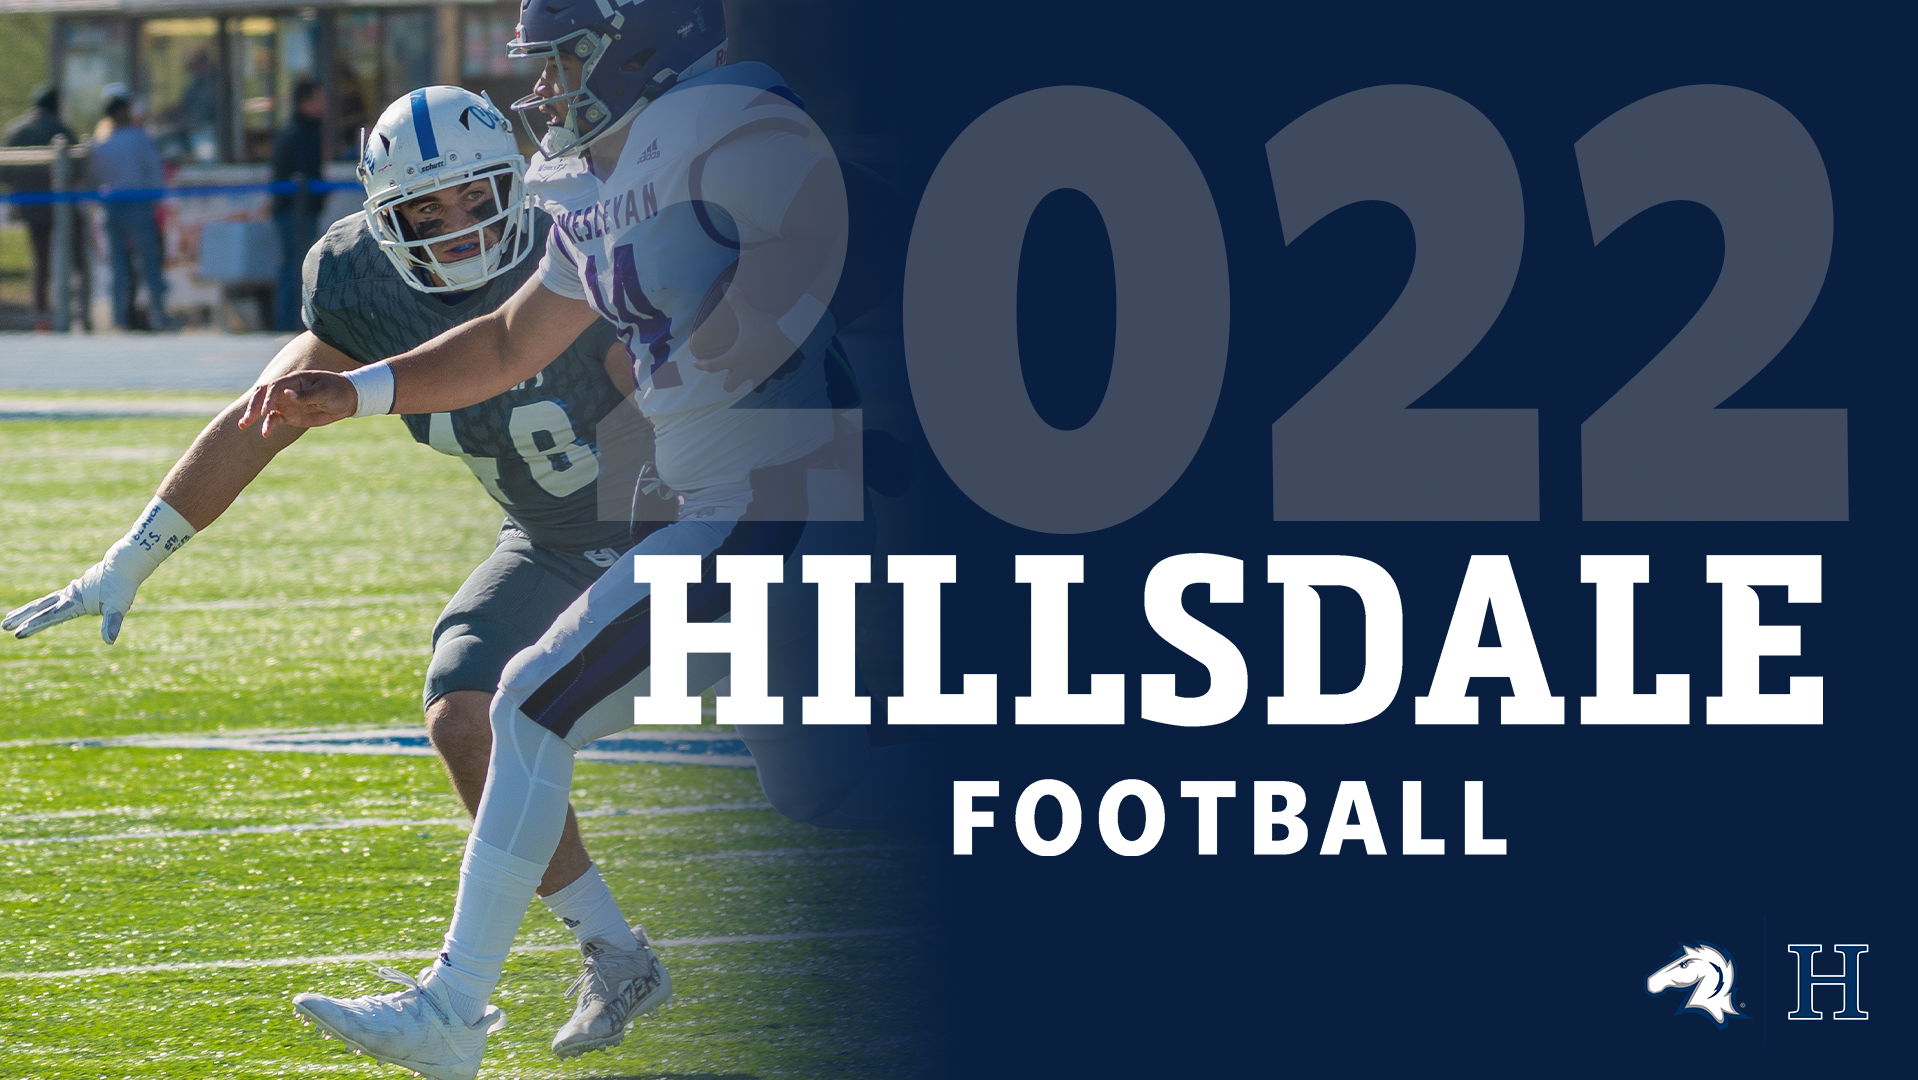 Charger football #Team130 announces 2022 football schedule, with six home contests